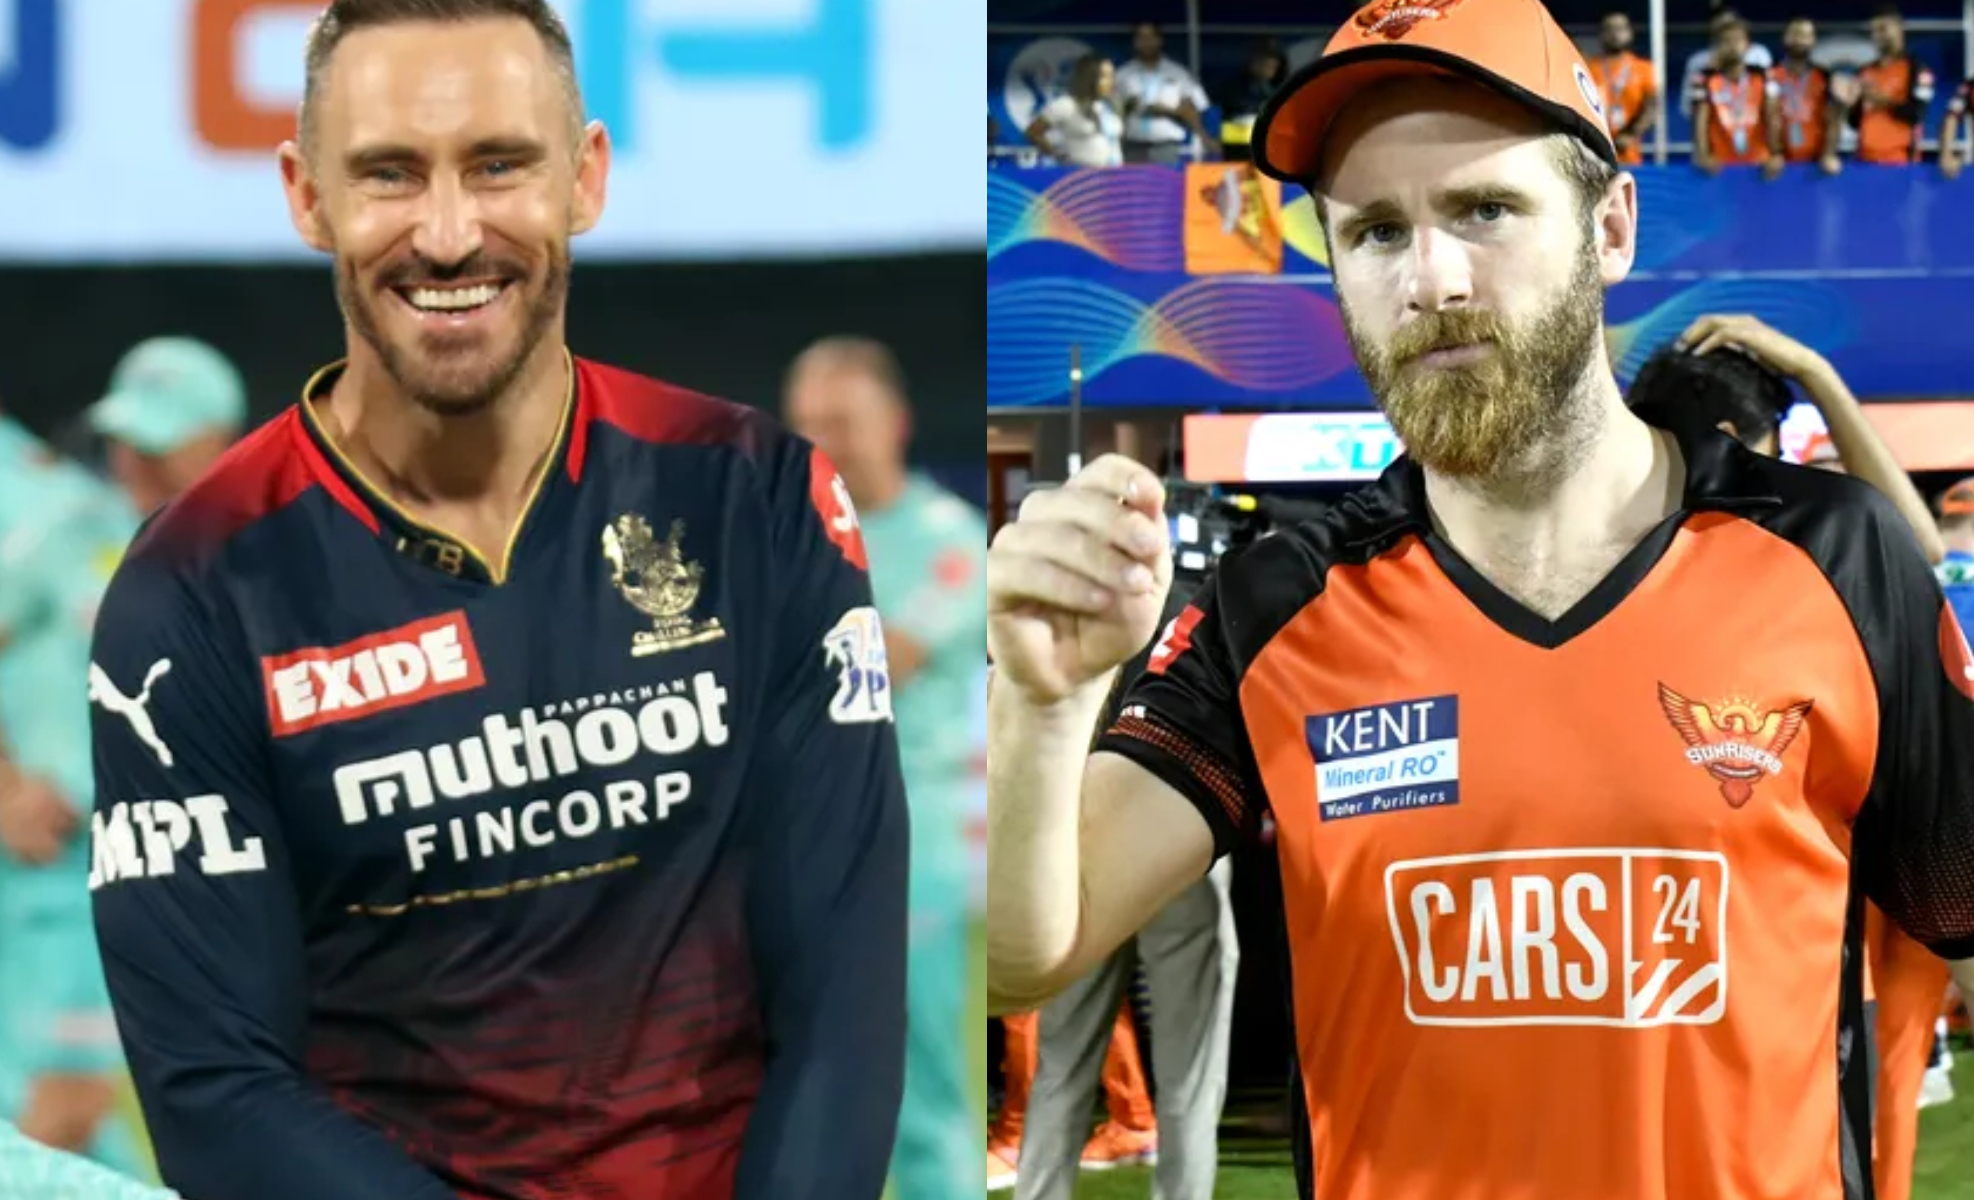 RCB have 5 wins from 7 matches, while SRH have 4 wins from 6 matches | BCCI-IPL